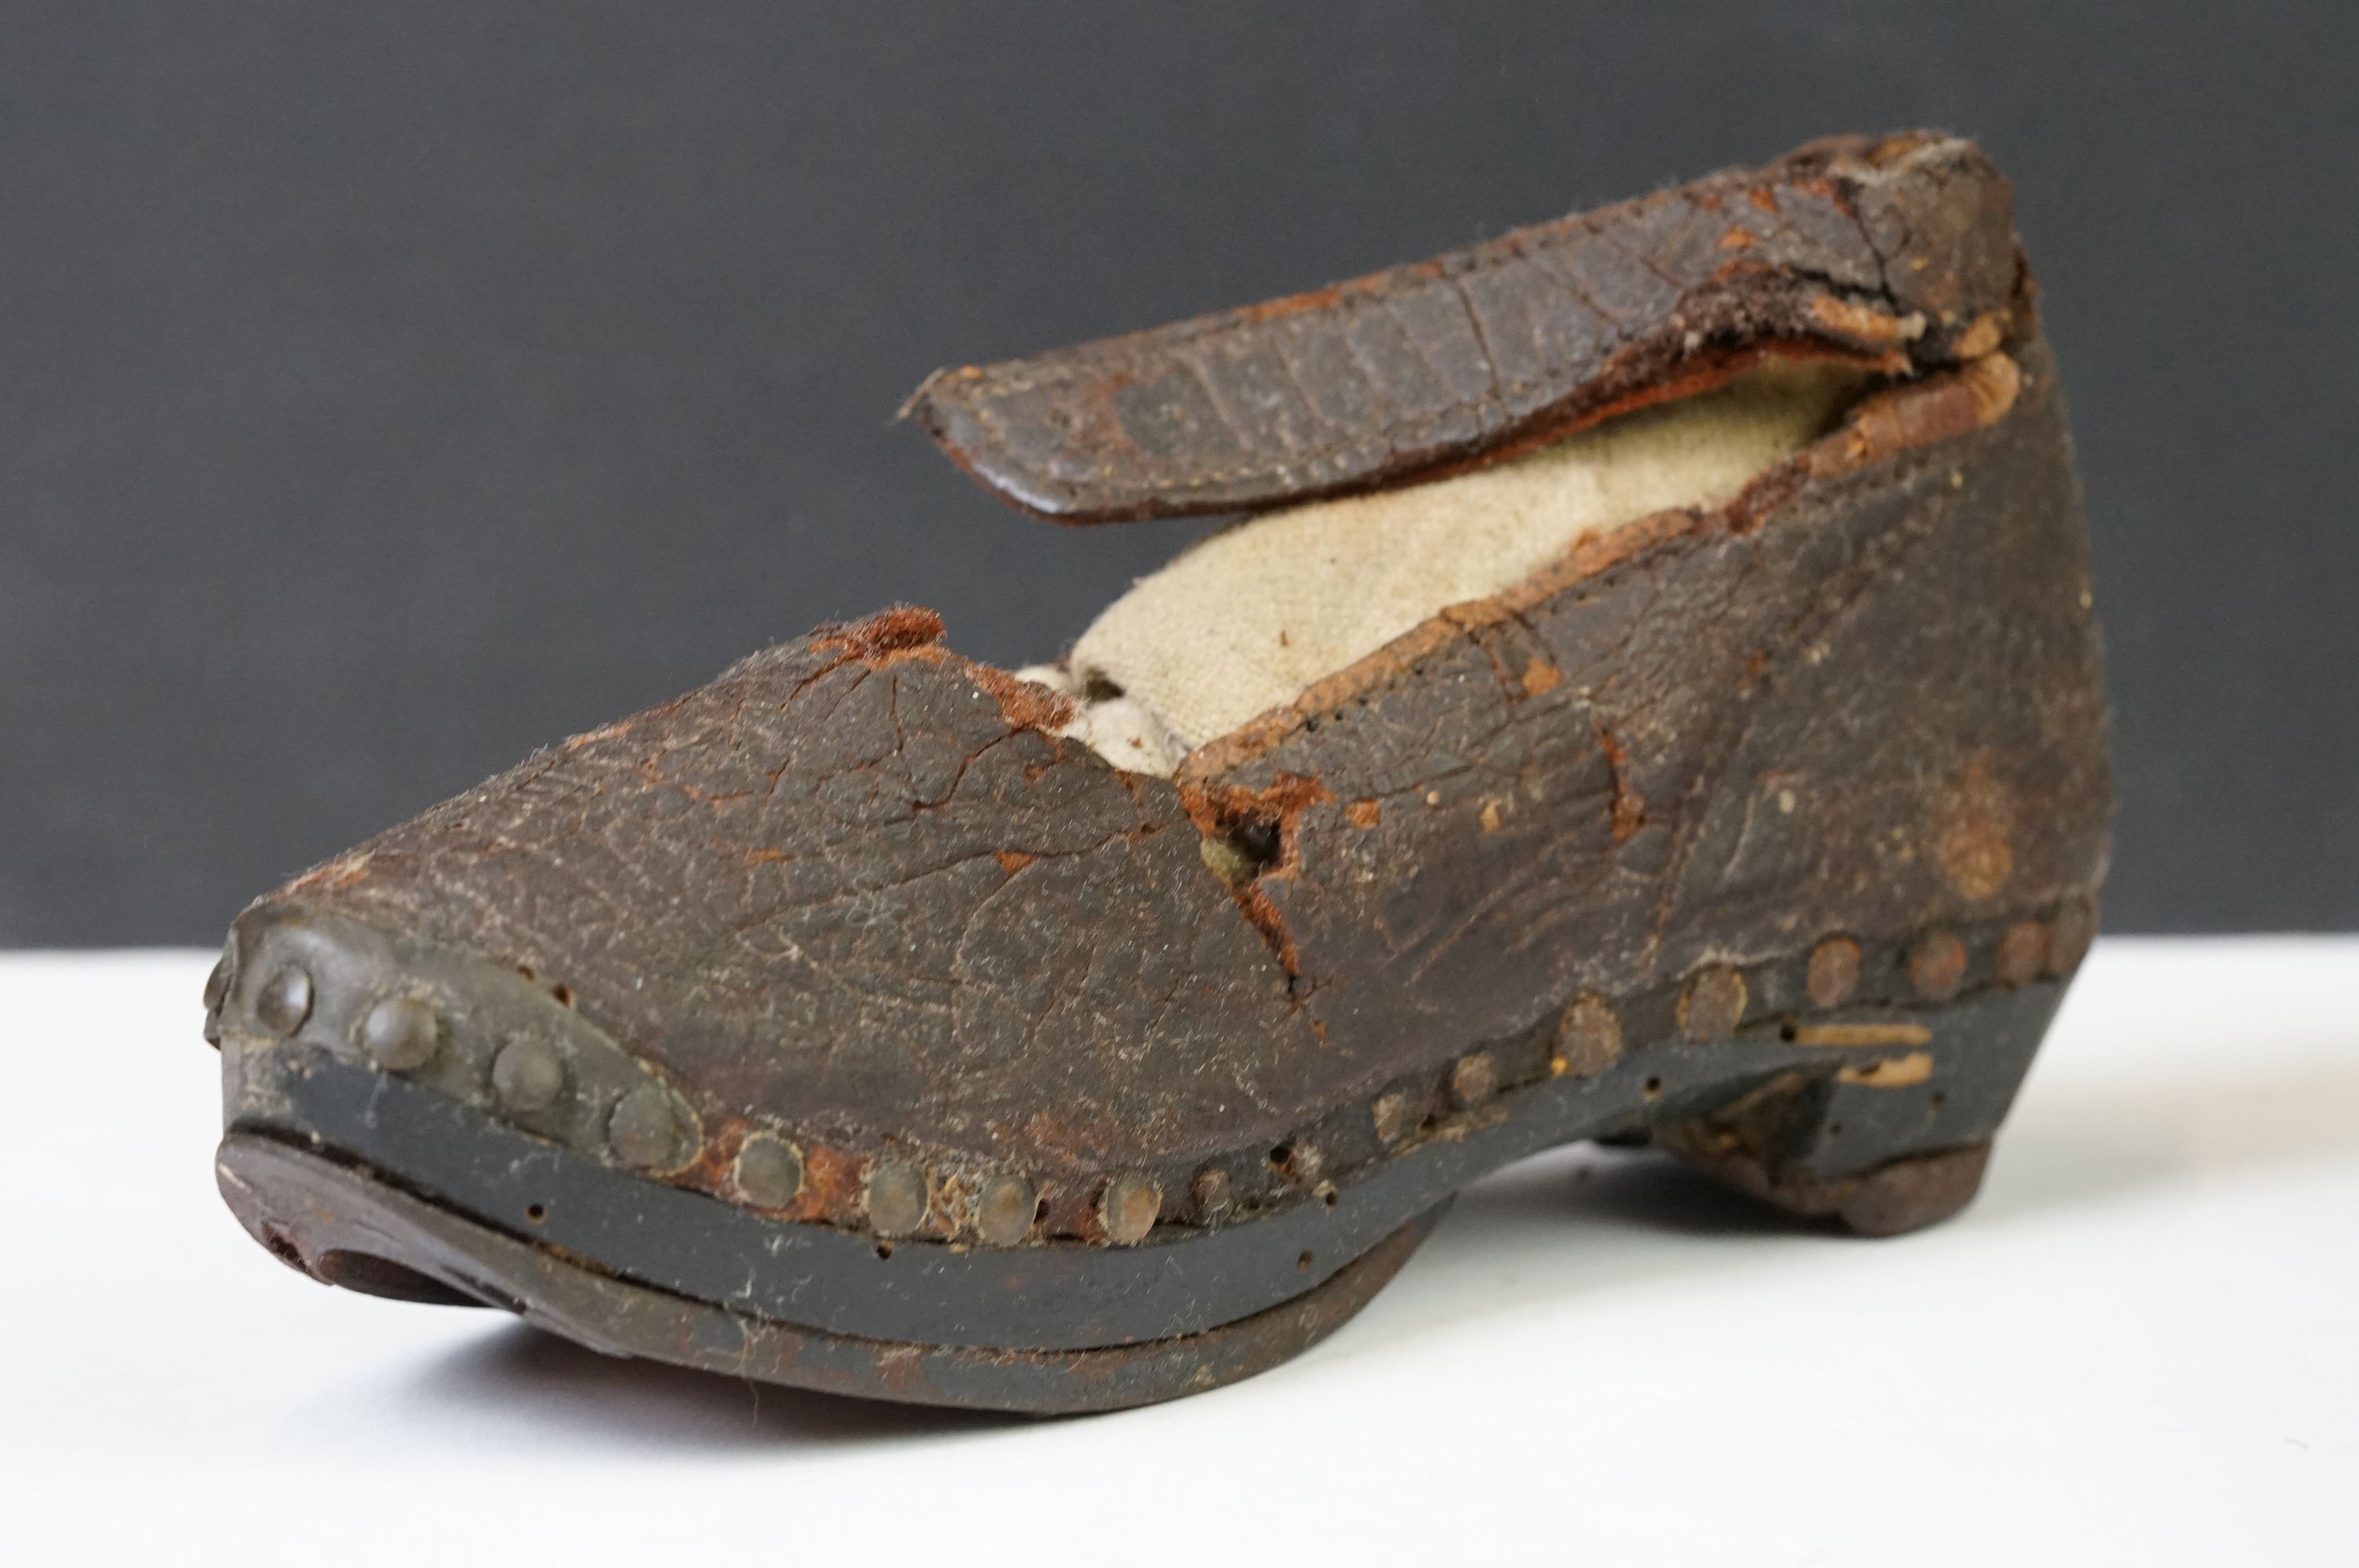 A pair of 'Latchet' leather Childs shoes c.1650-1700 - Image 4 of 10